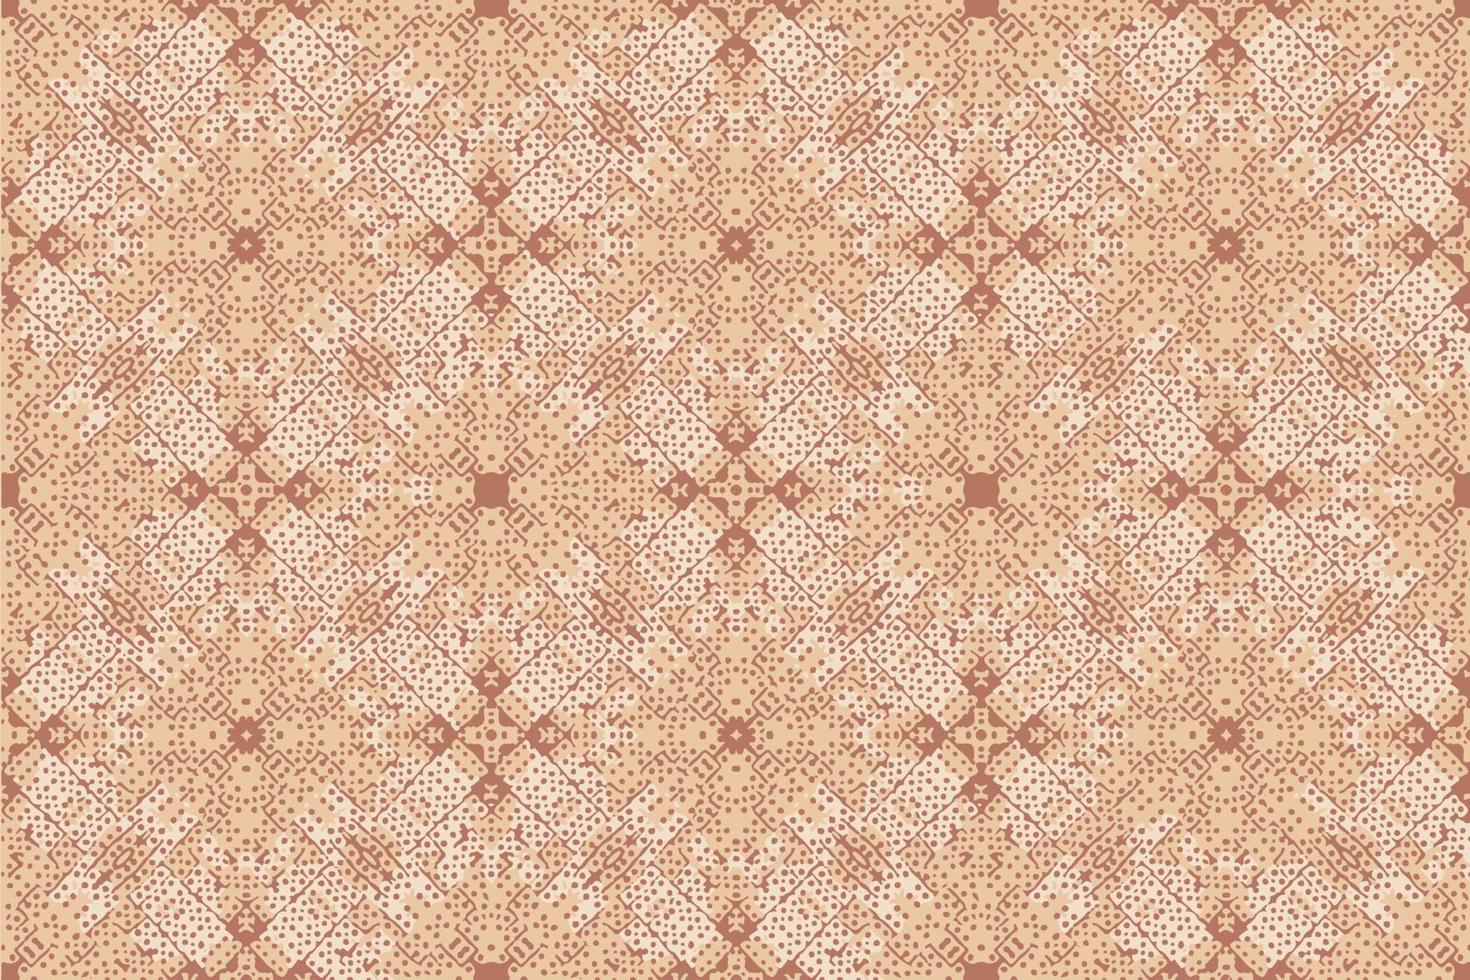 Beige Background Pattern Geometric Wallpaper Texture Seamless Pattern For  Fabric Tiles Interior Design Or Wallpaper Background Vector Image Stock  Illustration - Download Image Now - iStock